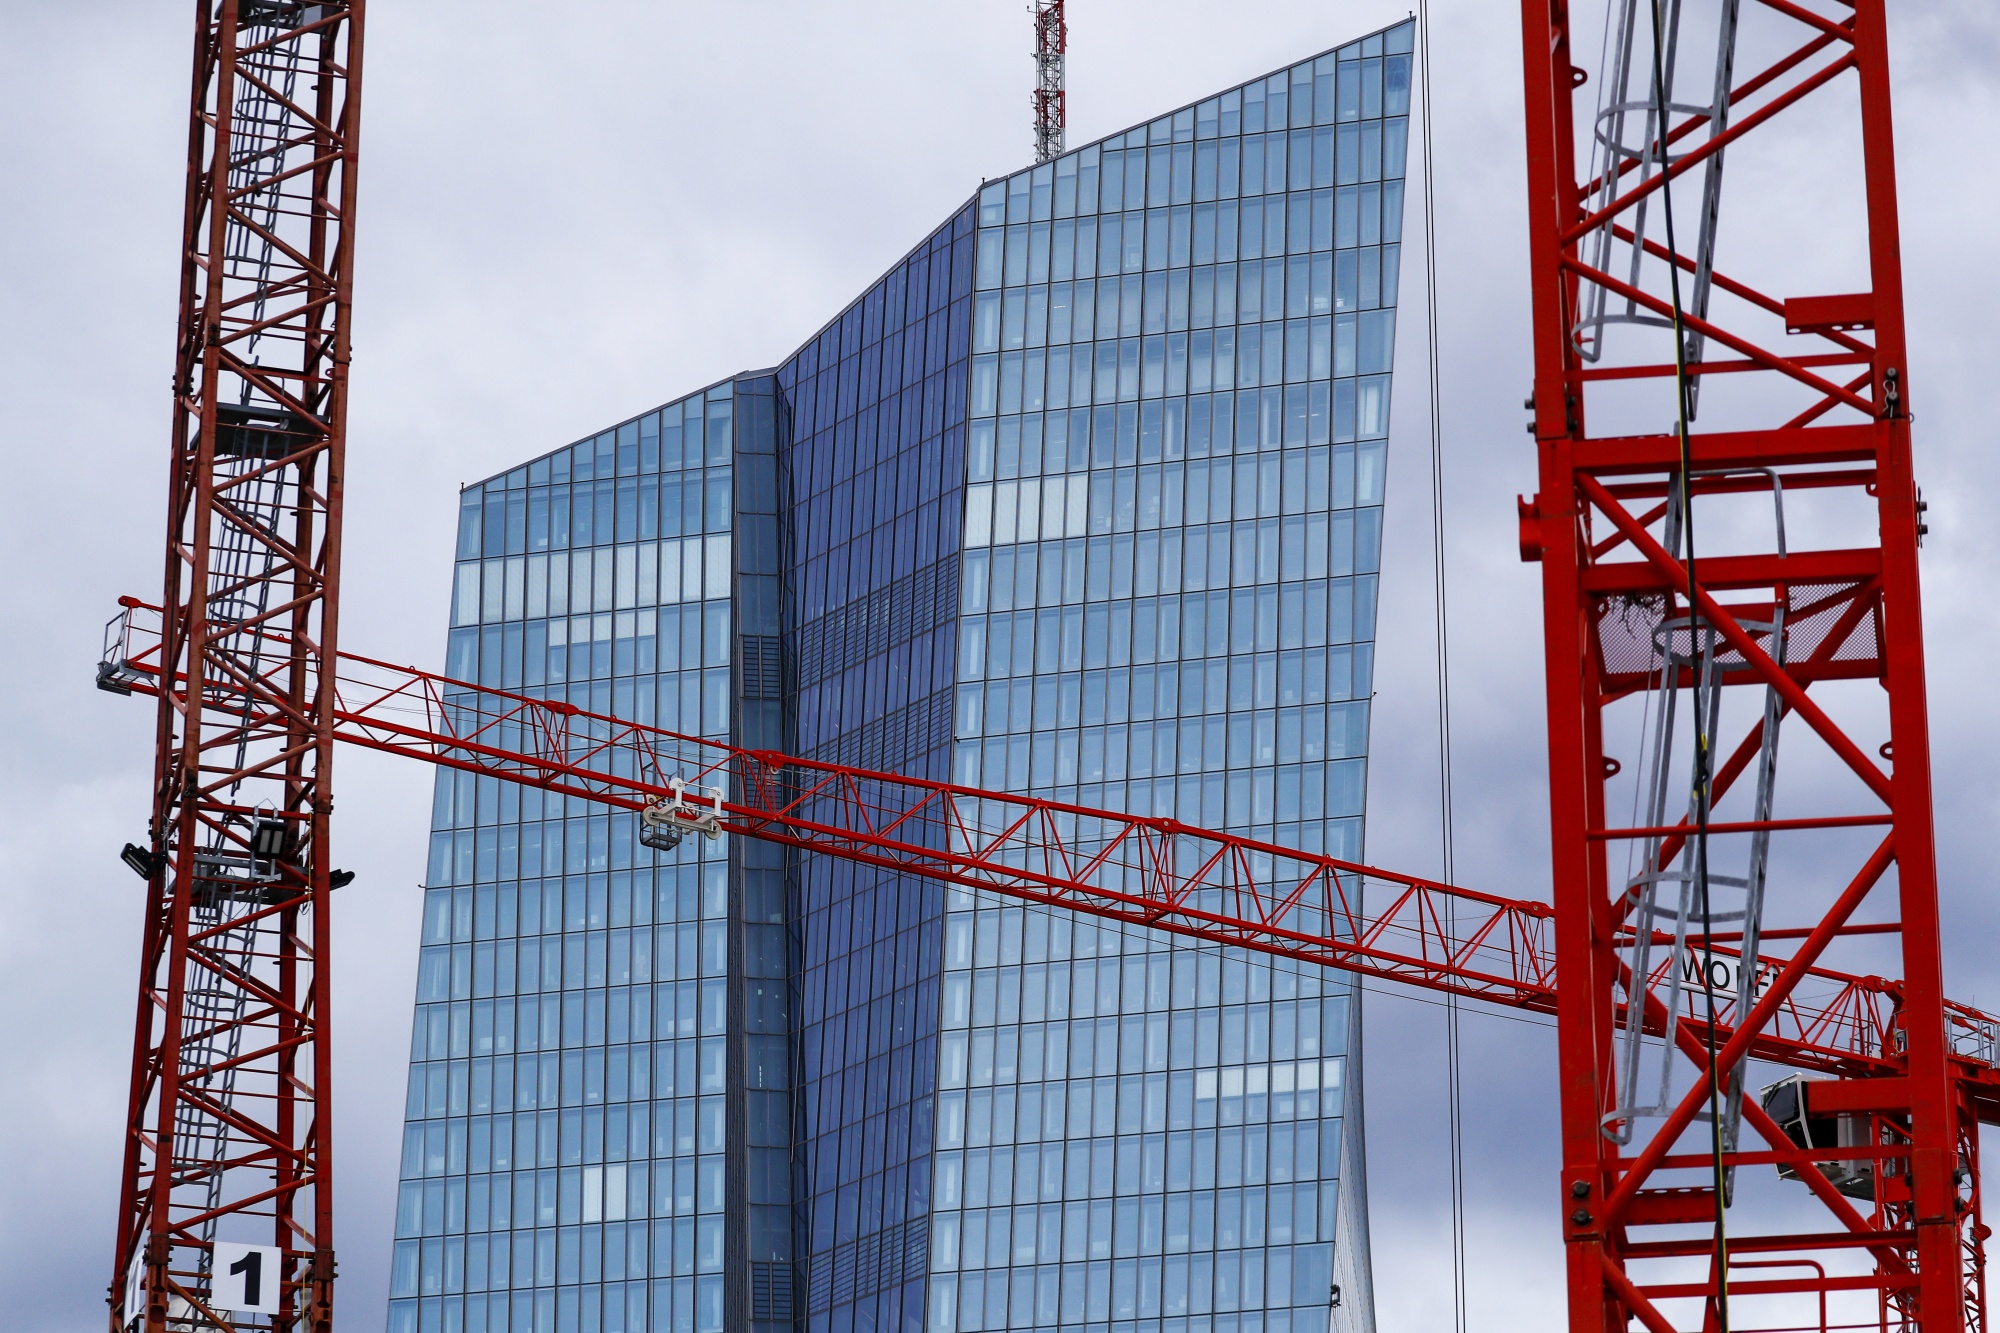 Cranes stand in front of the European Central Bank (ECB) headquarters in Frankfurt, Germany, on Wednesday, April 29, 2020. The ECB's response to the coronavirus has calmed markets while setting it on a path that could test its commitment to the mission to keep prices stable.